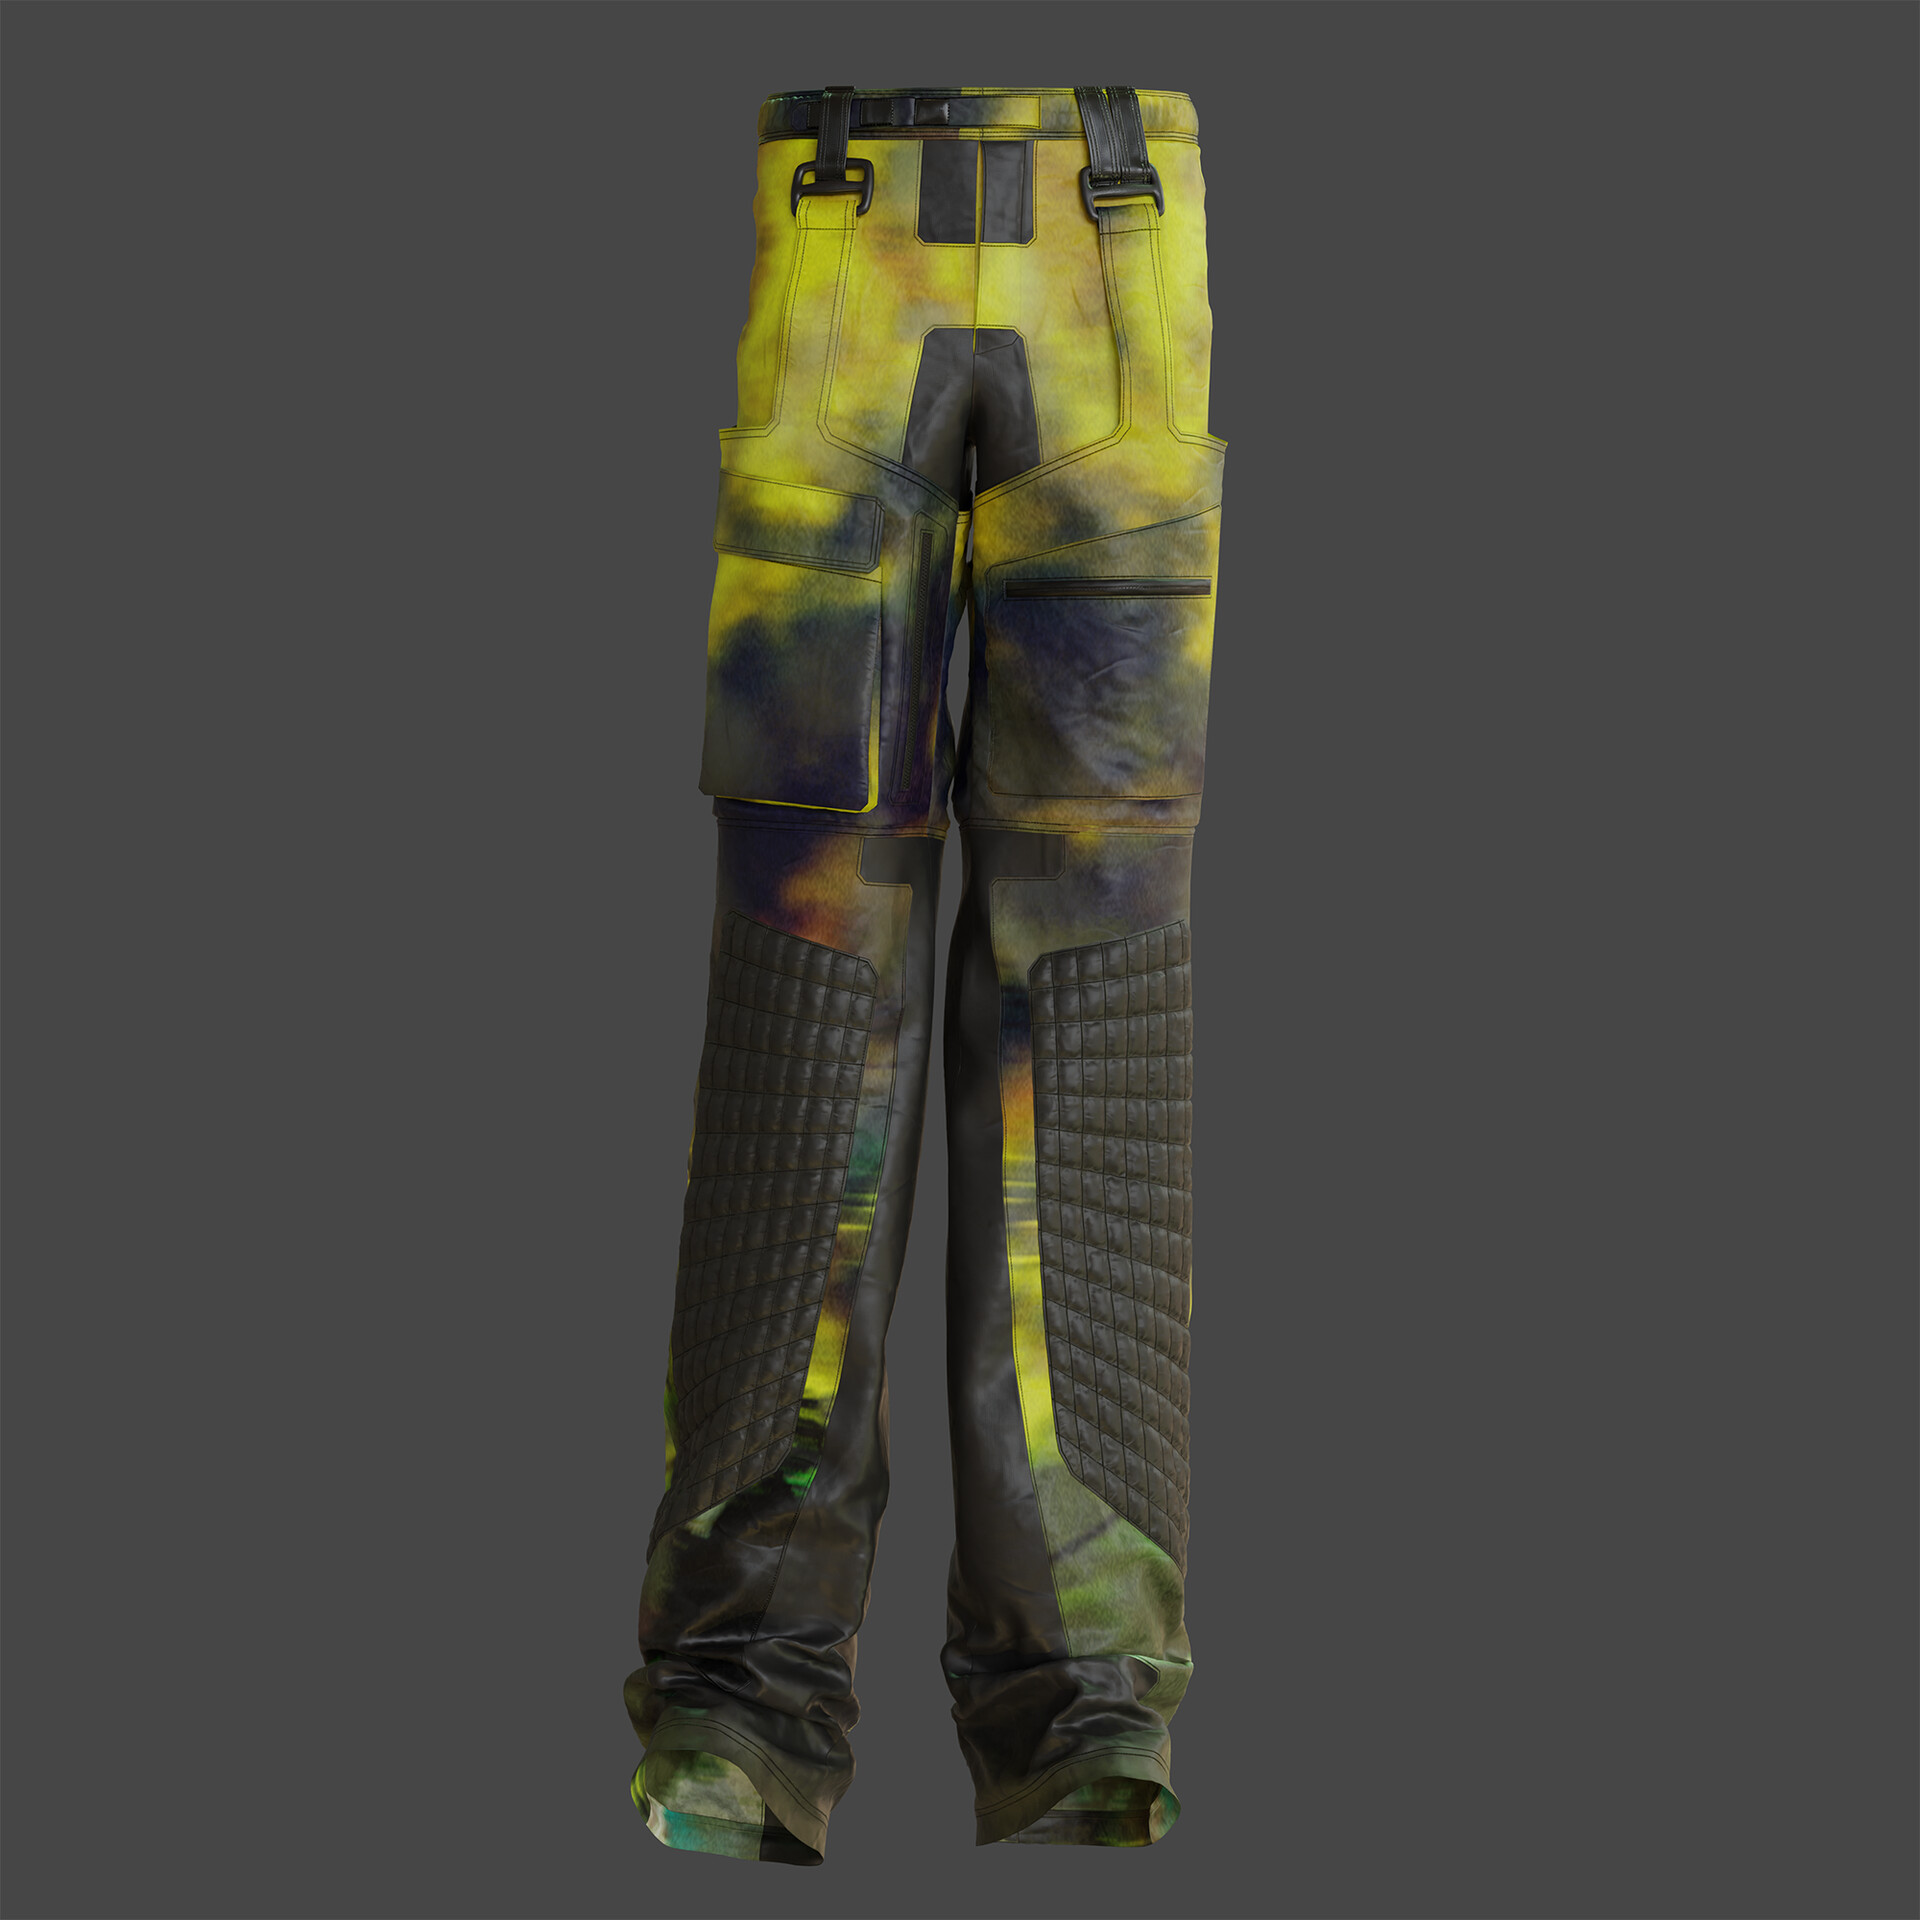 ArtStation - Trousers With Print